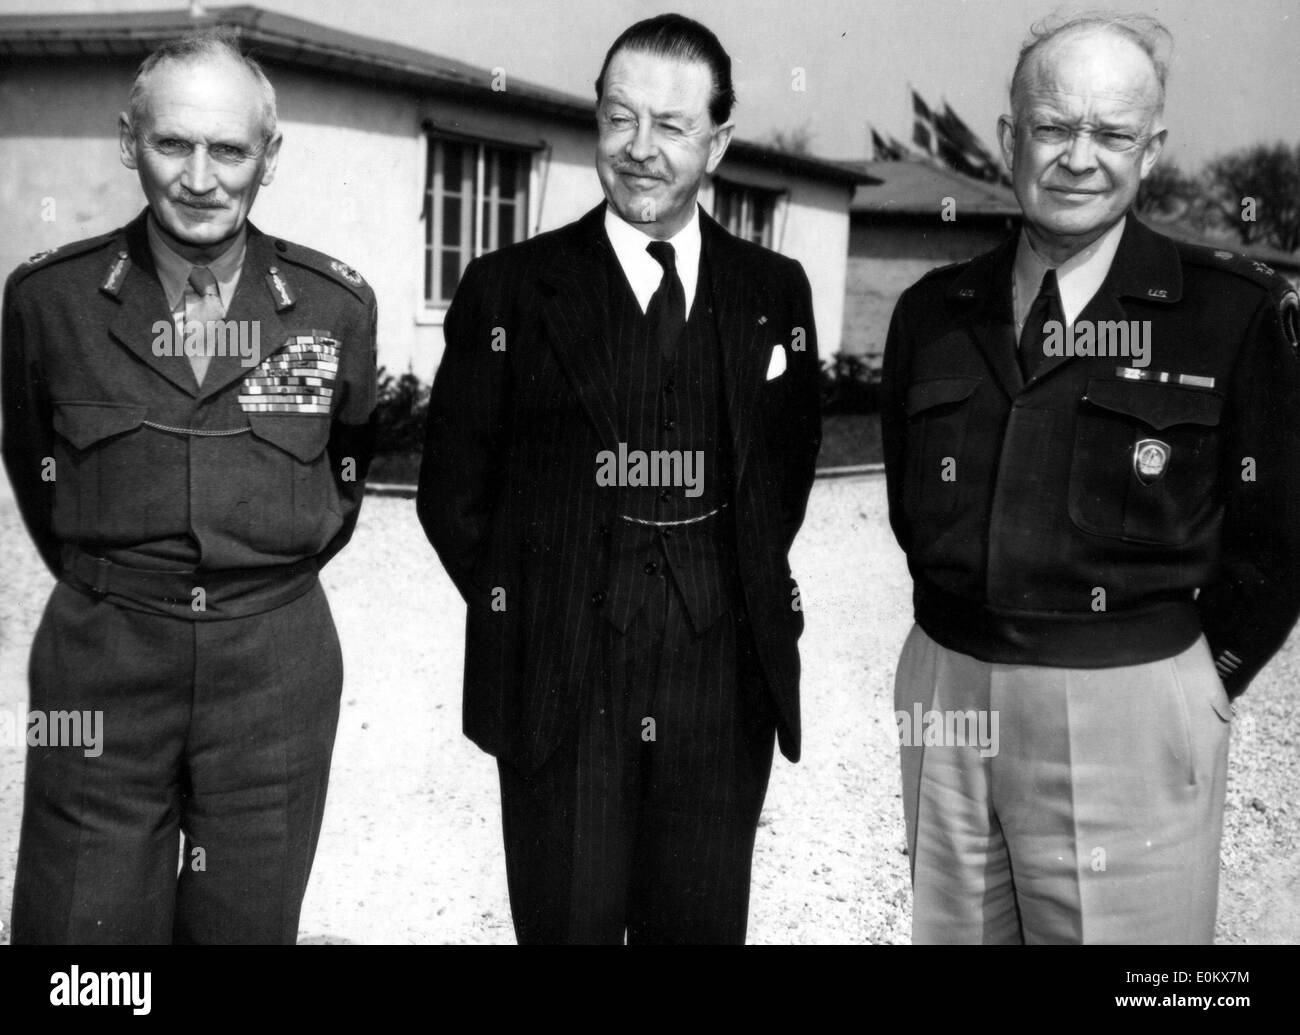 President Eisenhower with army Generals Stock Photo